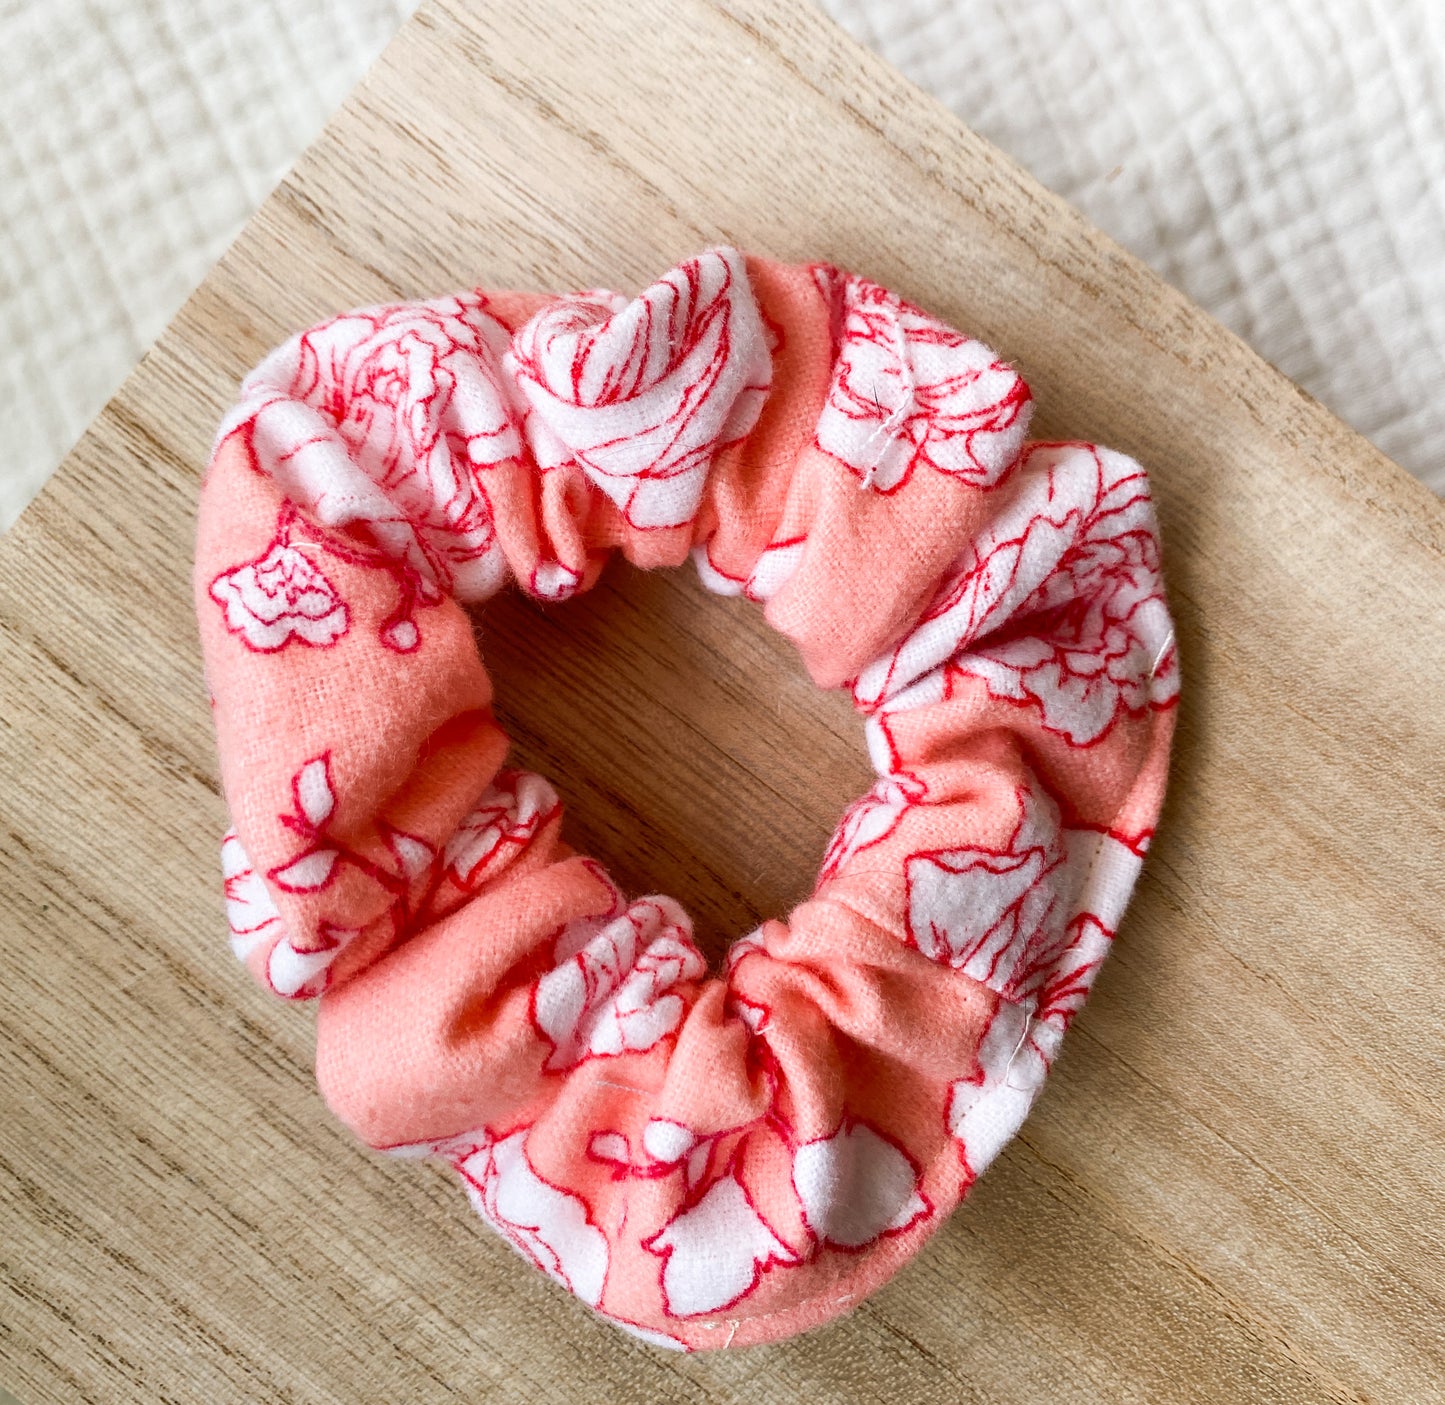 Summer Soft Hair Scrunchies | Stretchy Hair Tie | Cute Fabric Accessory | Pink Florals | Abstract Lines | Boho Rainbows | Sunflowers | 100% Cotton